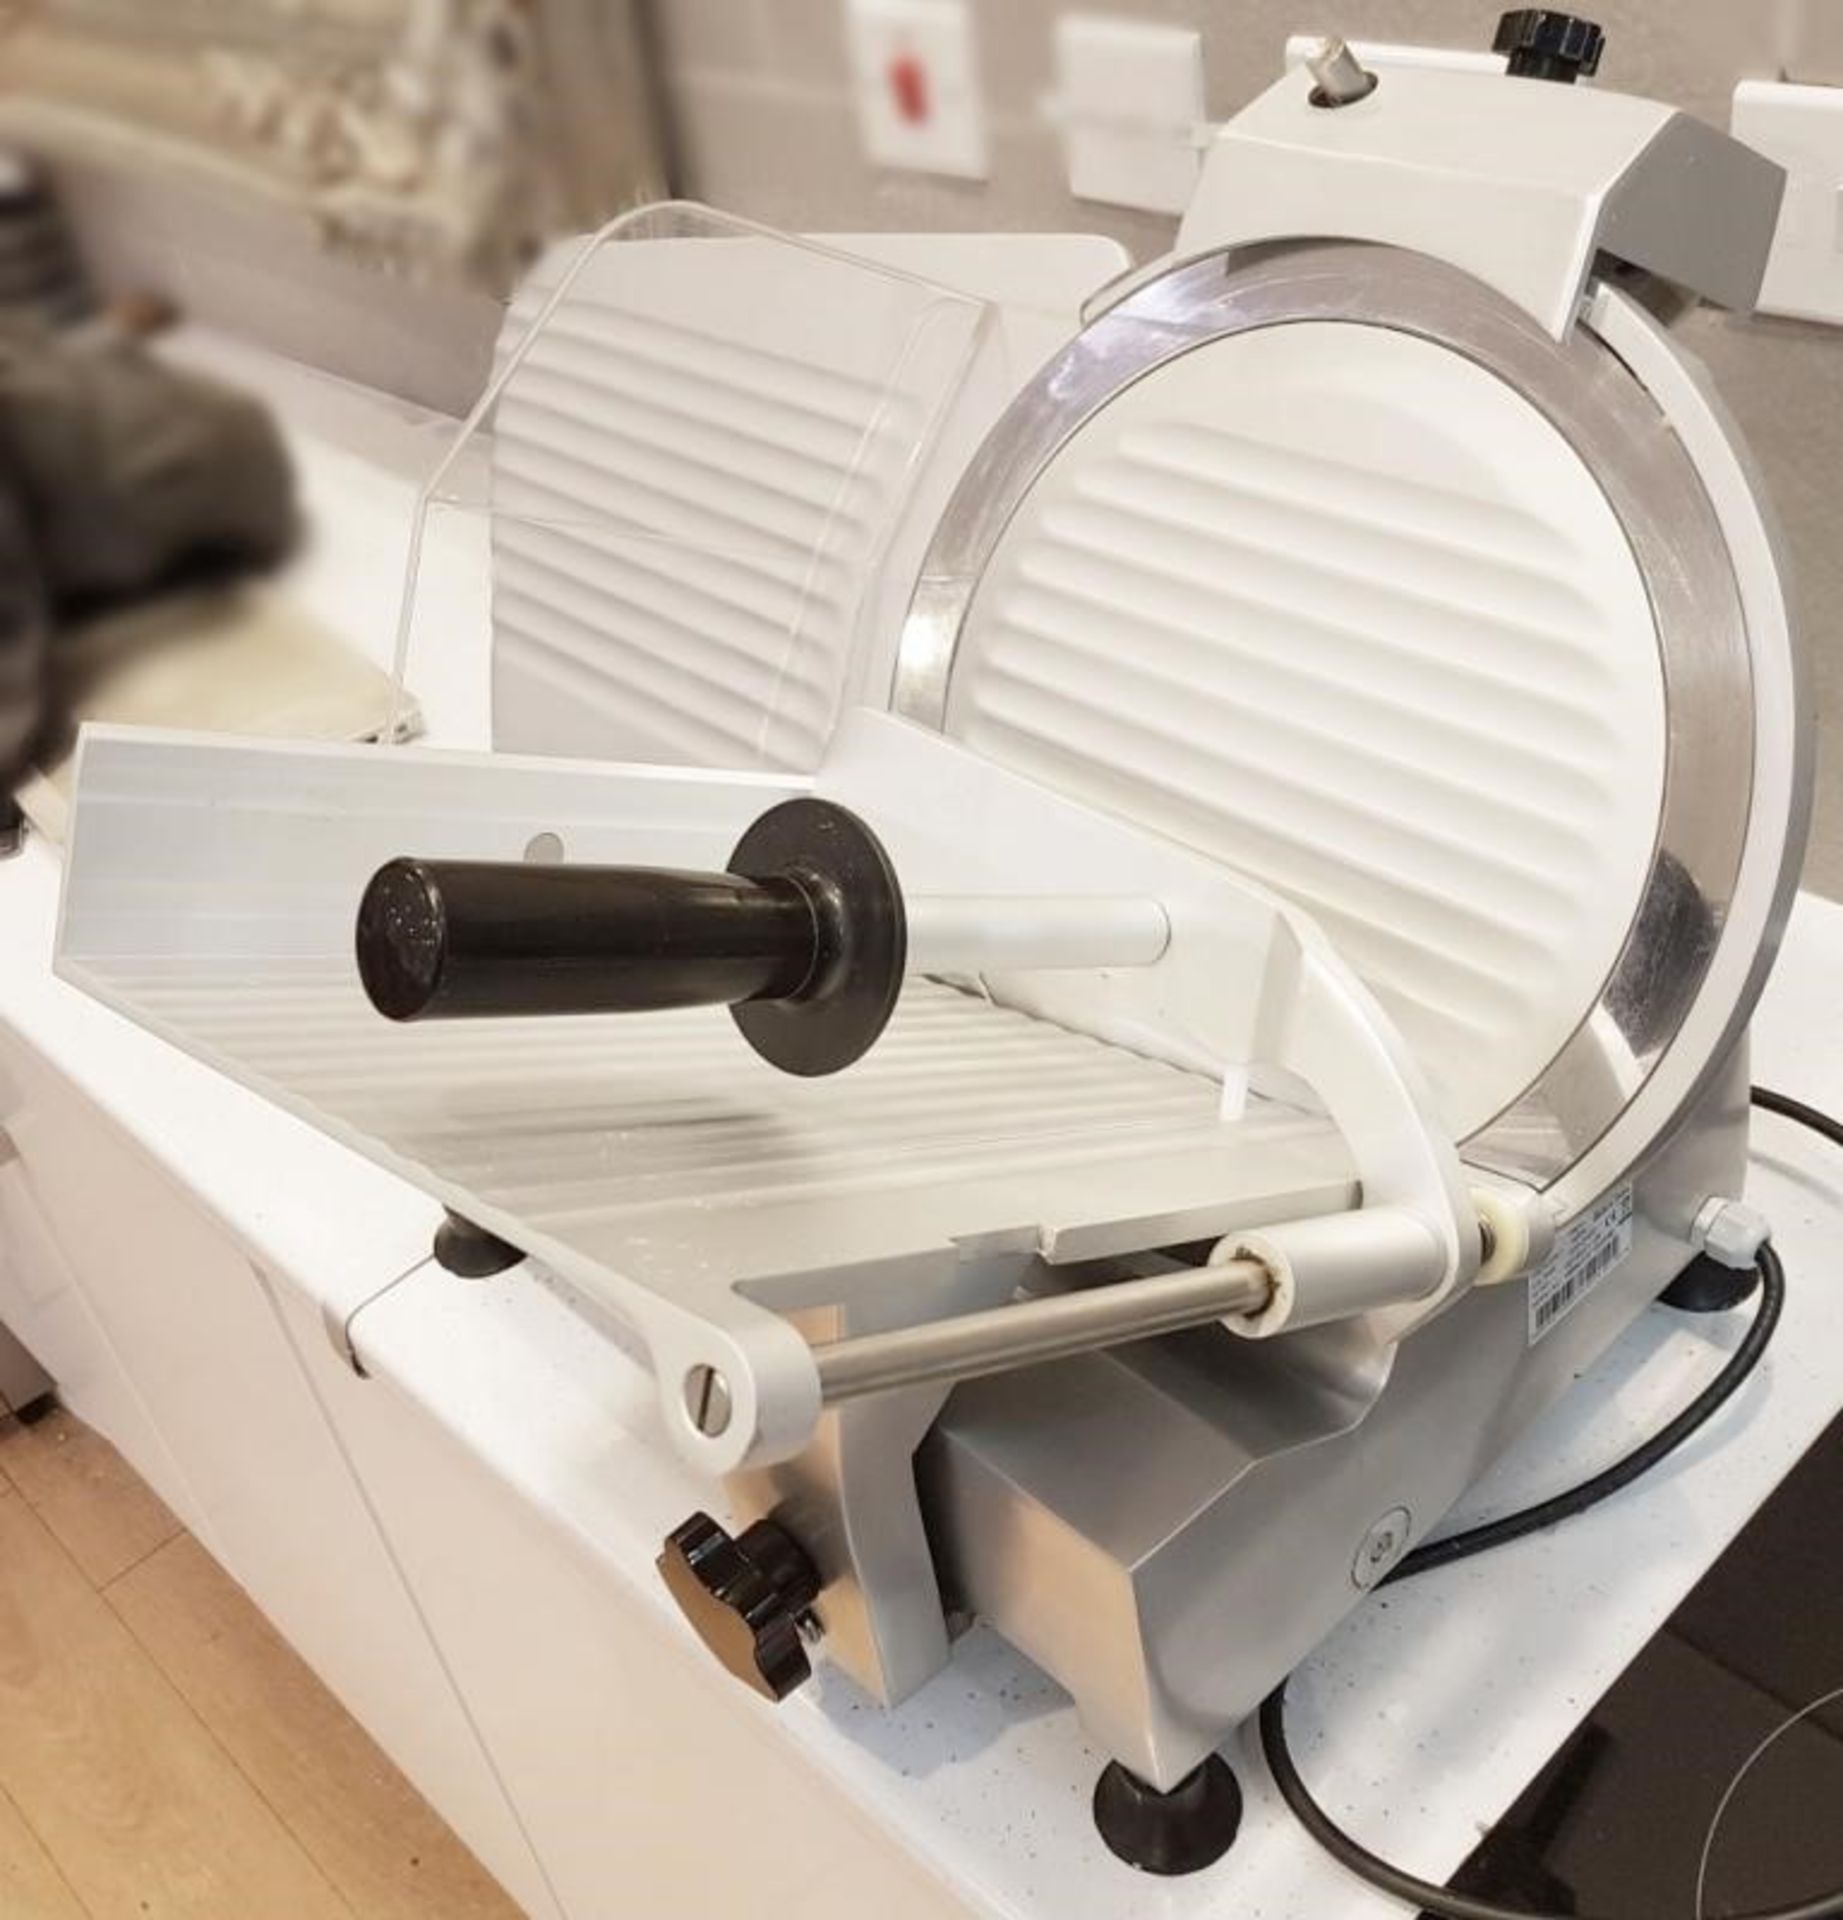 1 x Buffalo Meat Slicer 300mm (CD279) - Around 12 Months Old In Great Condition - From A Gourmet Del - Image 8 of 8